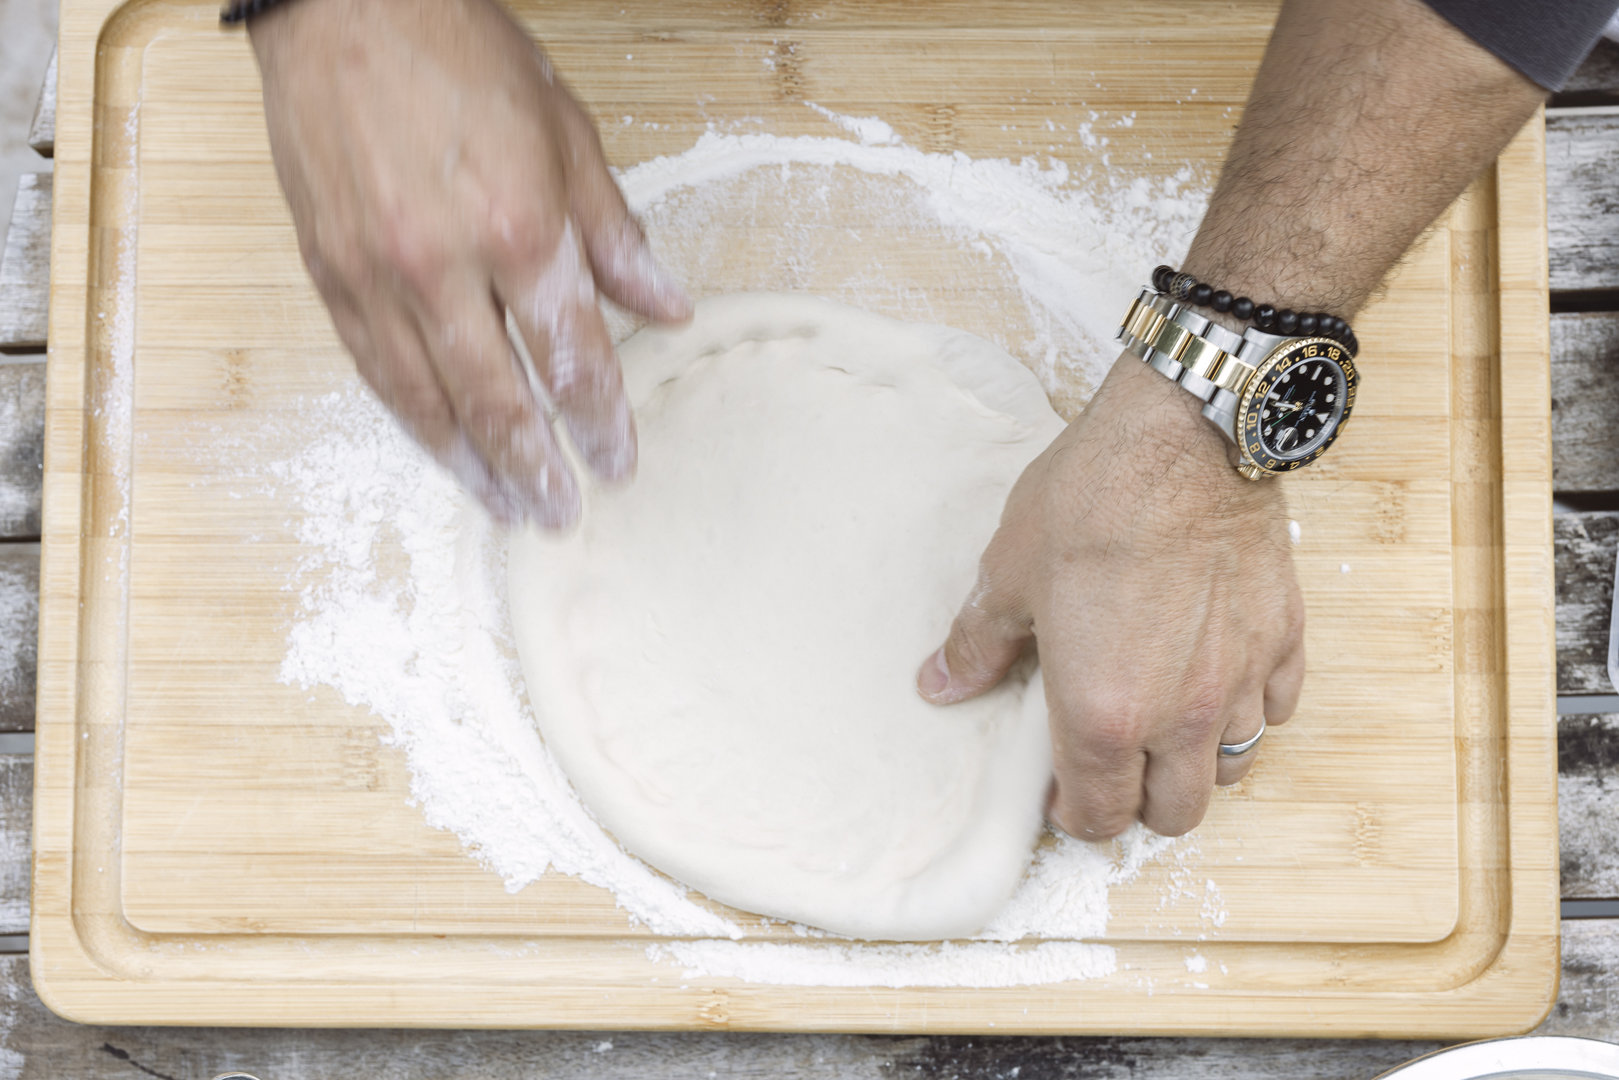 how to take great food photos for pizza party night by shooting pizza chef flatten pizza dough